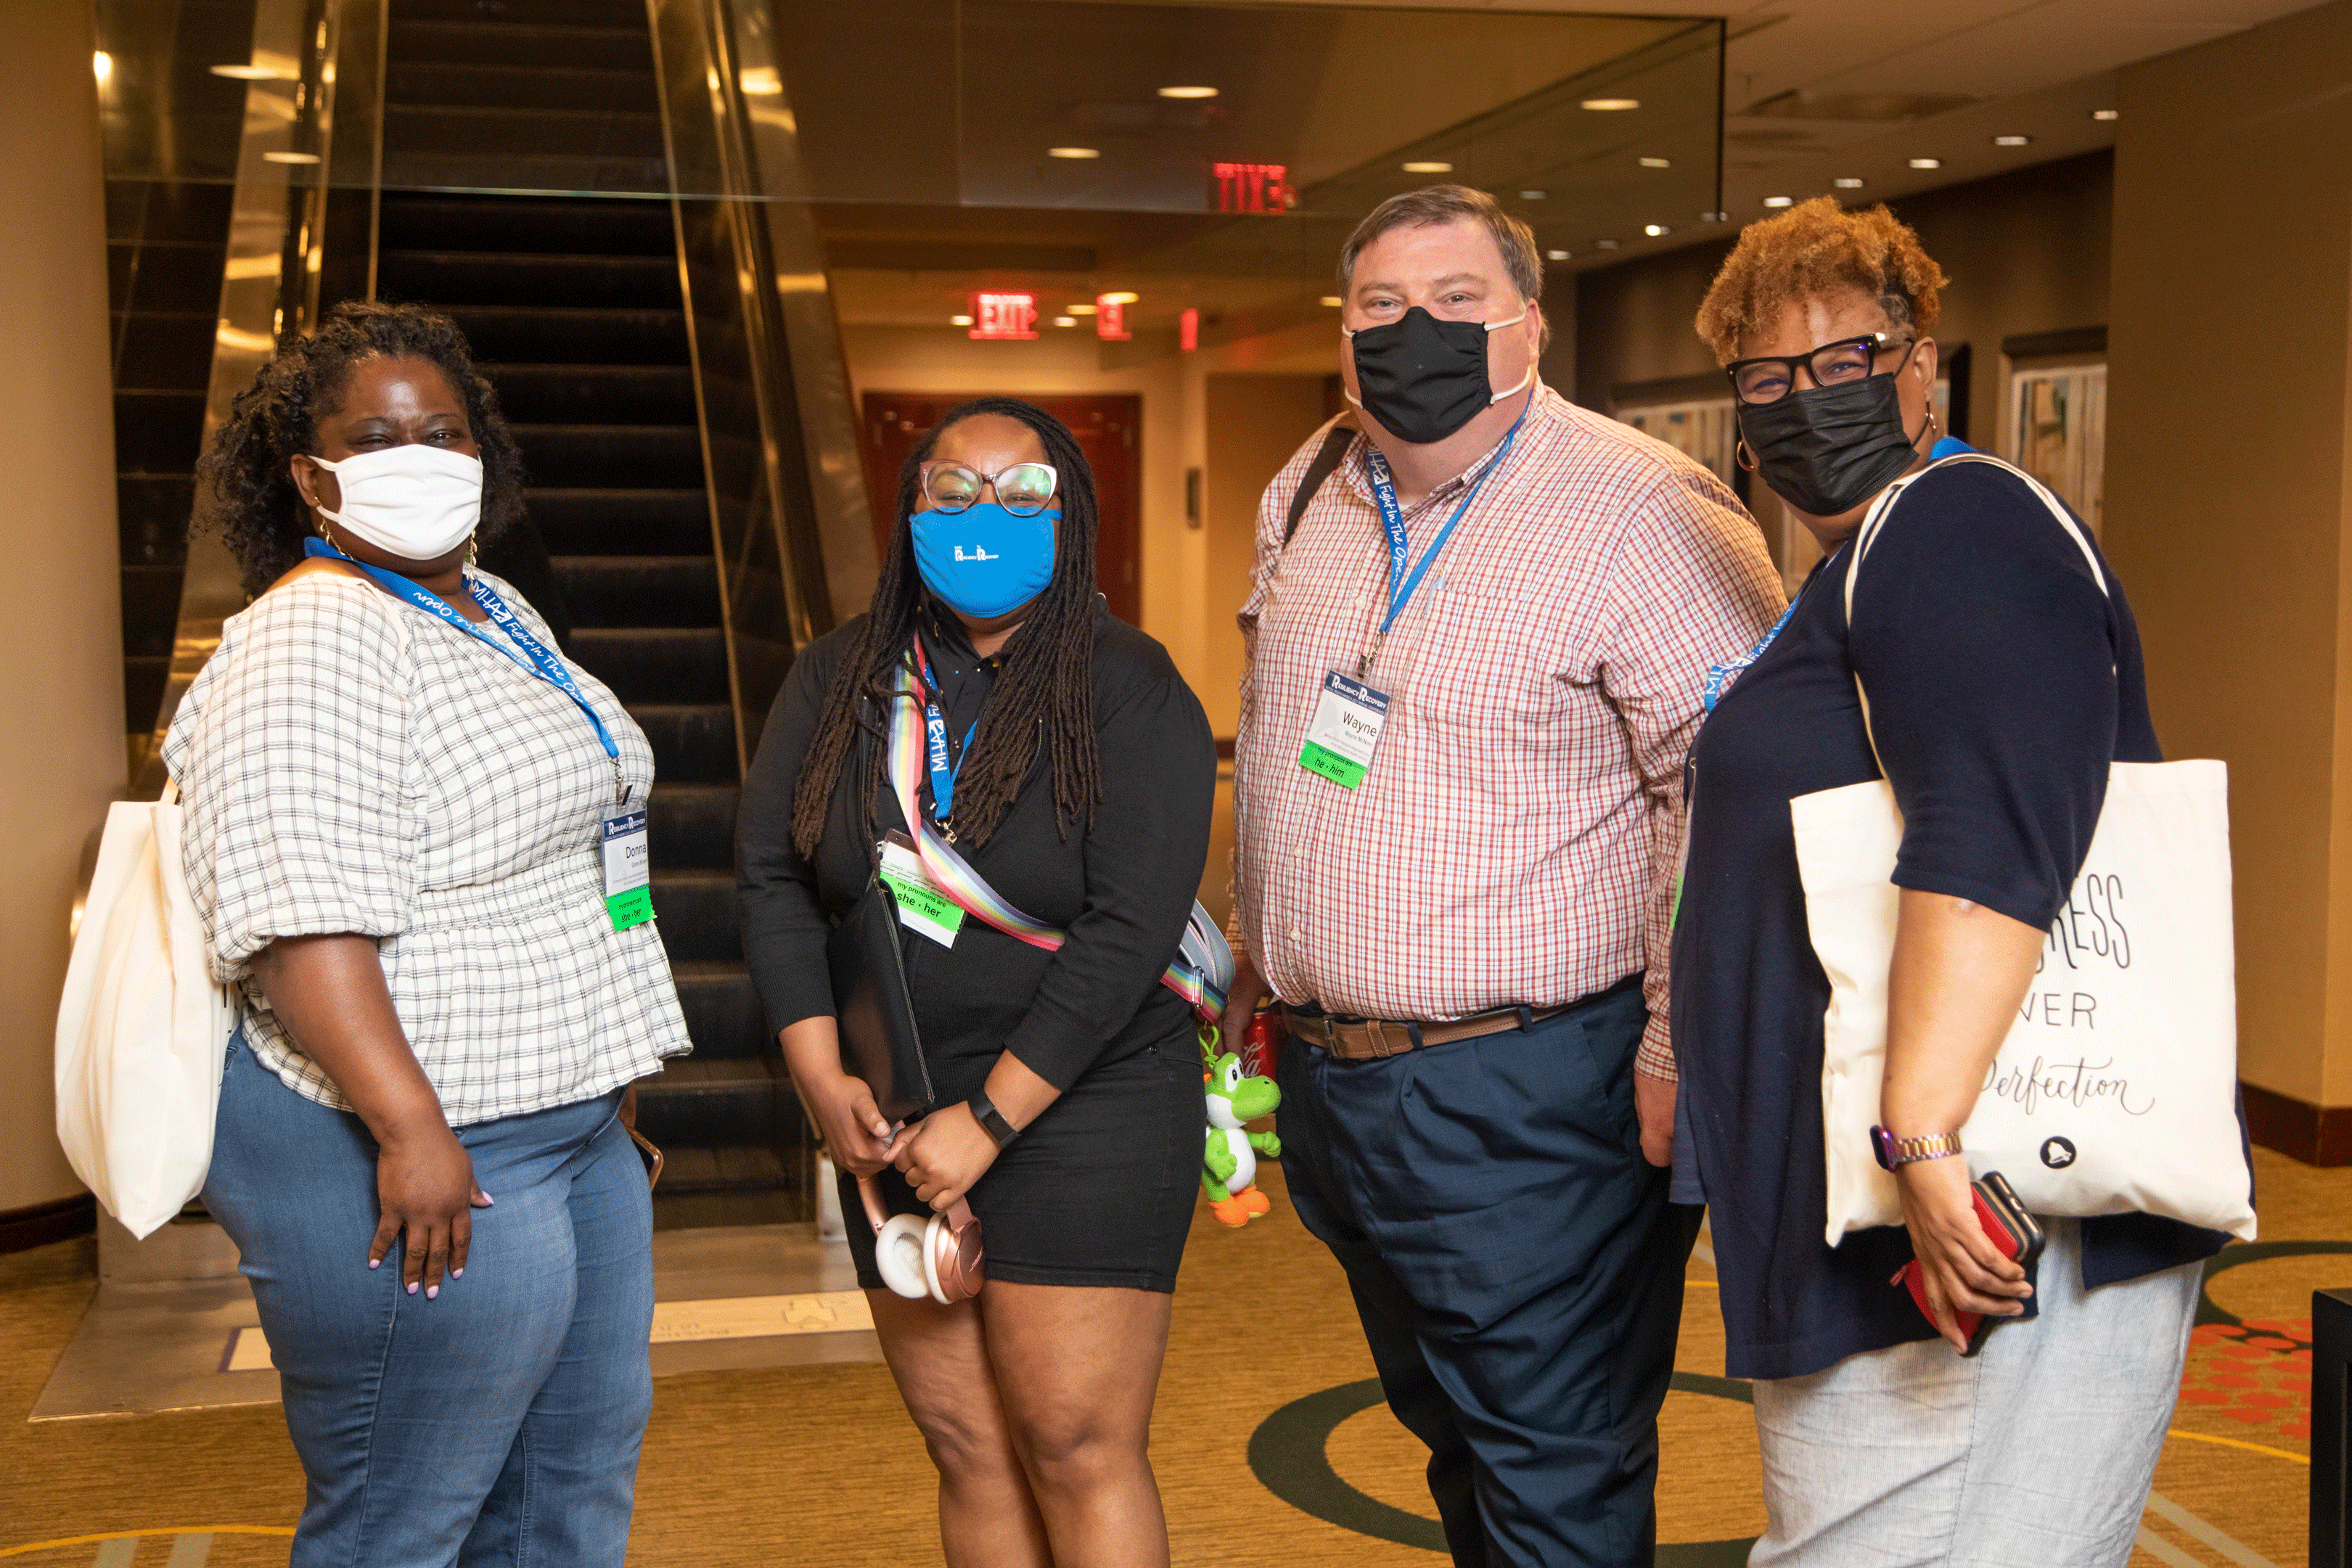 4 people wearing masks and conference nametags stand together at the base of an escalator and look at the camera